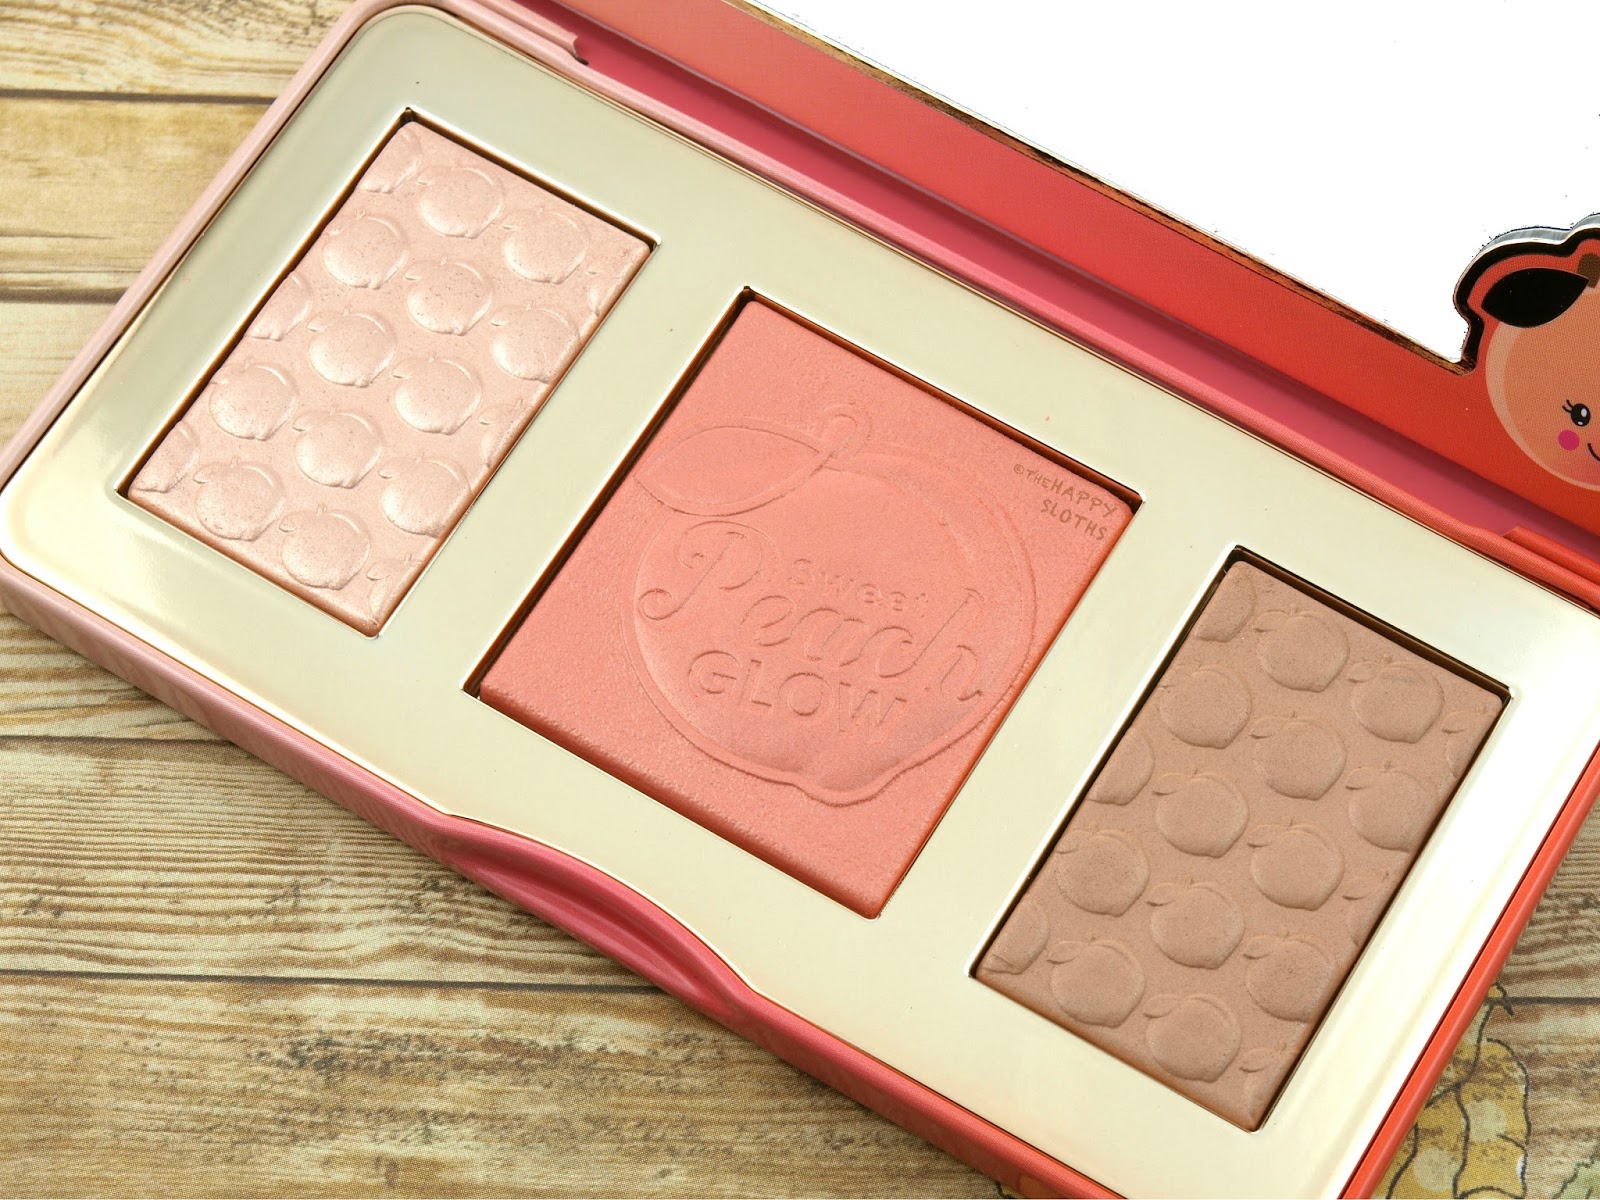 Too Faced Sweet Peach Glow Peach-Infused Highlighting Palette Swatches Review